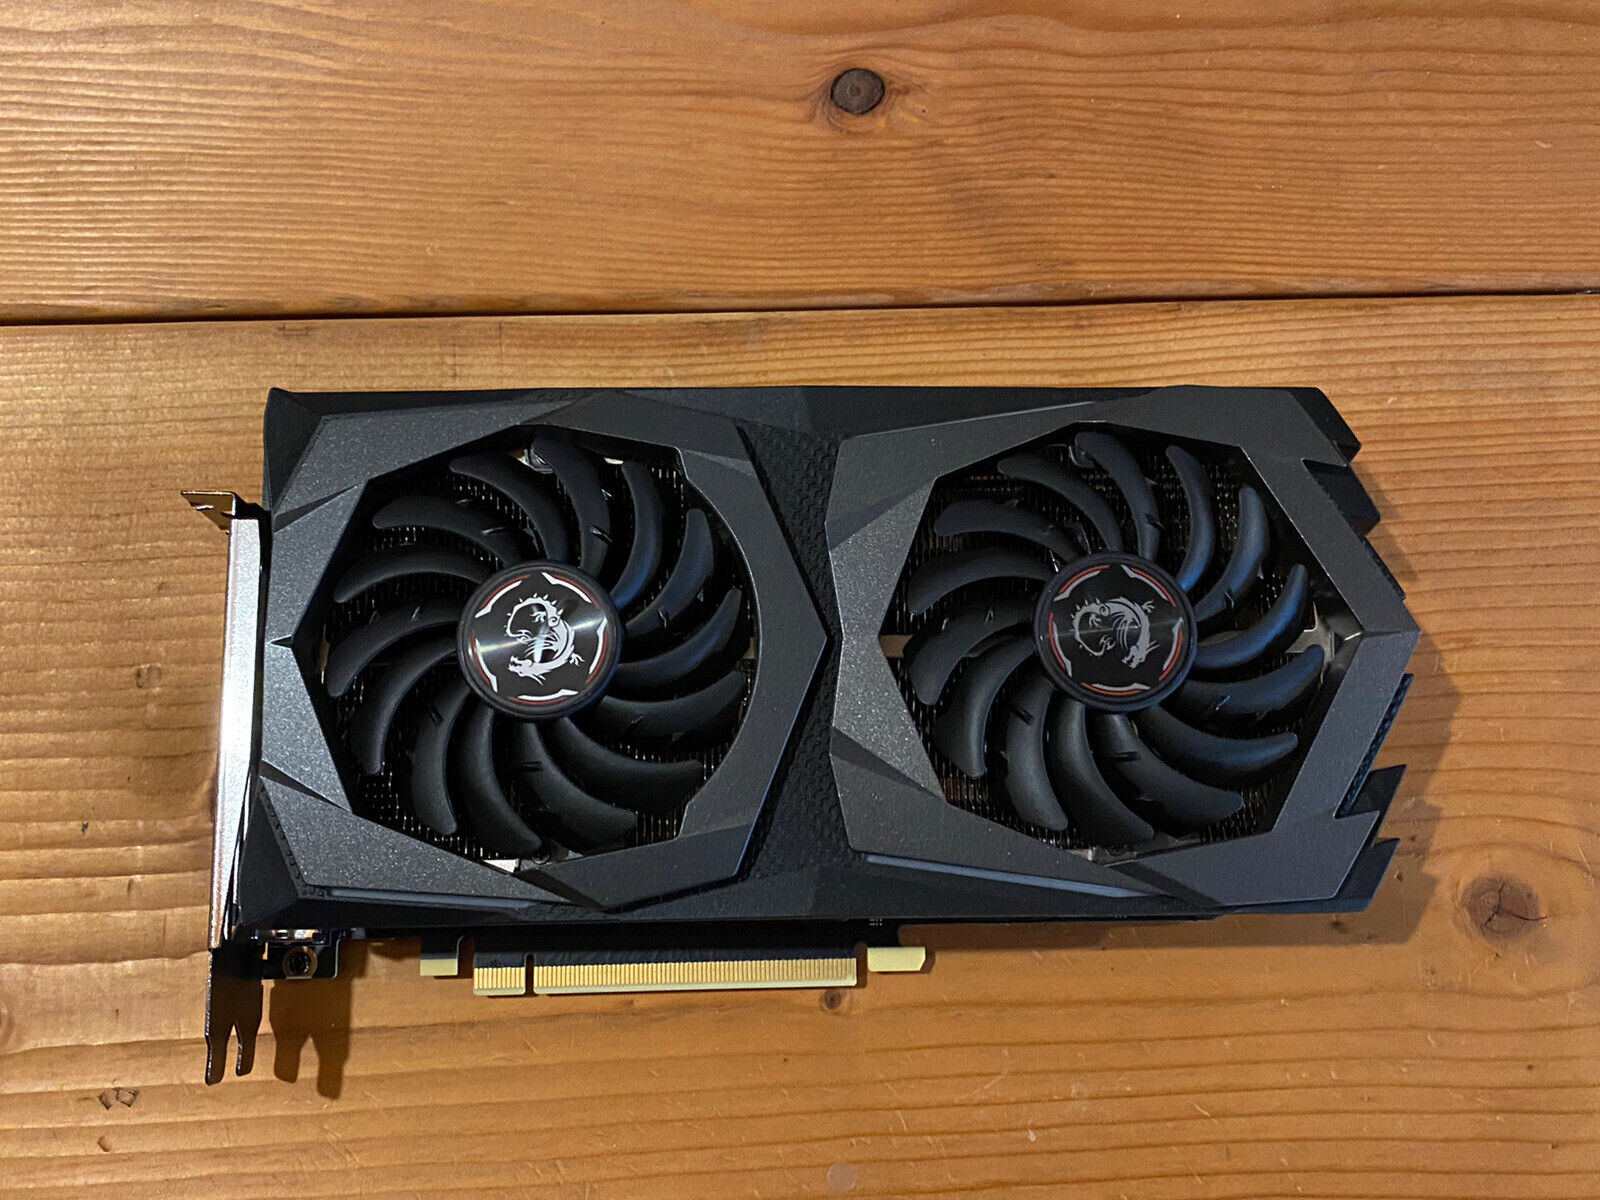 MSI GeForce RTX 2060 Gaming X 6GB GDDR6 Graphics Card - barely used